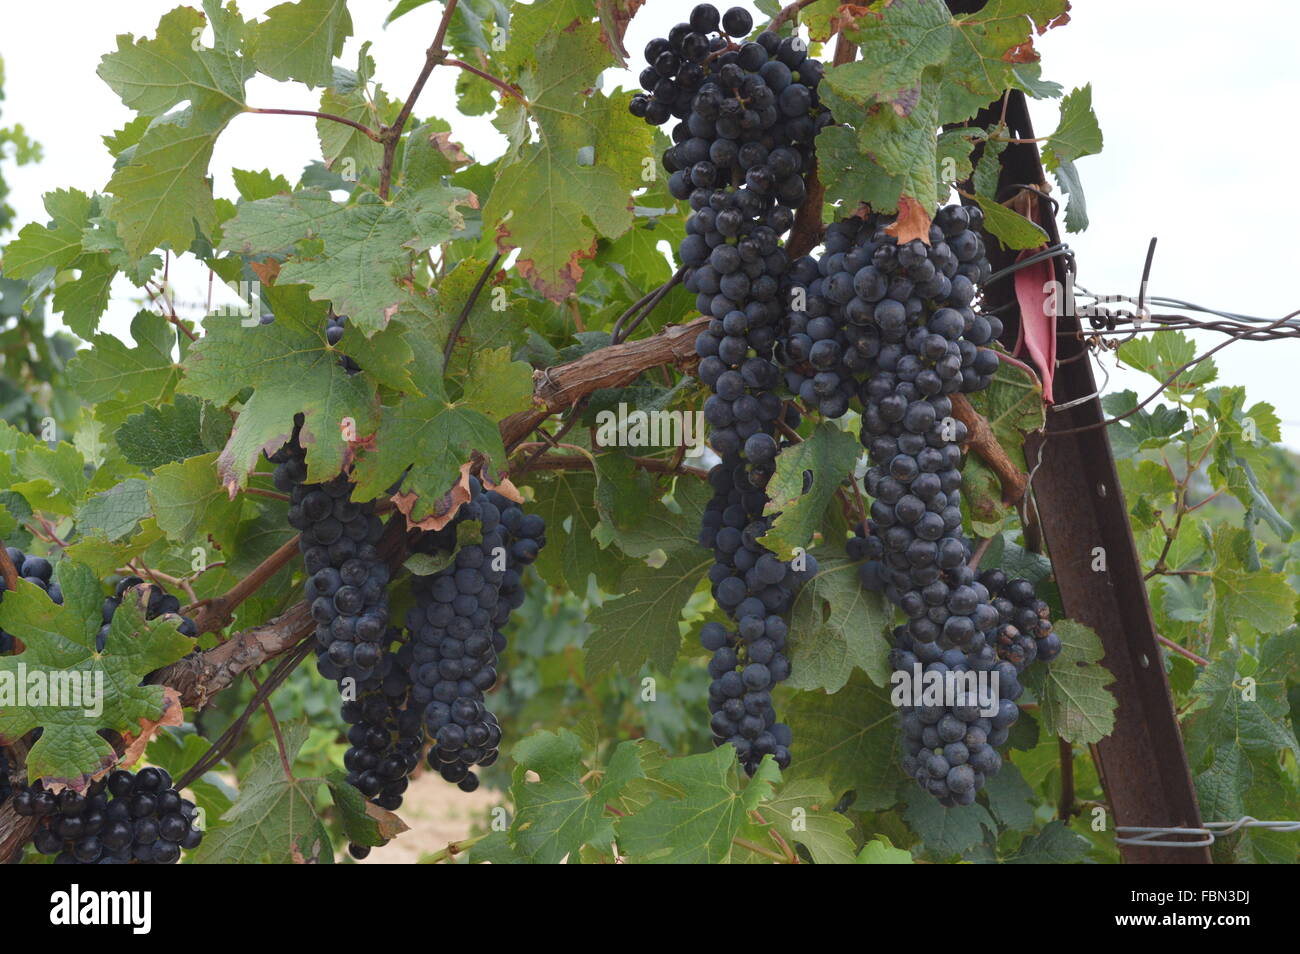 Low Angle View Of Grapes In Vineyard Stock Photo